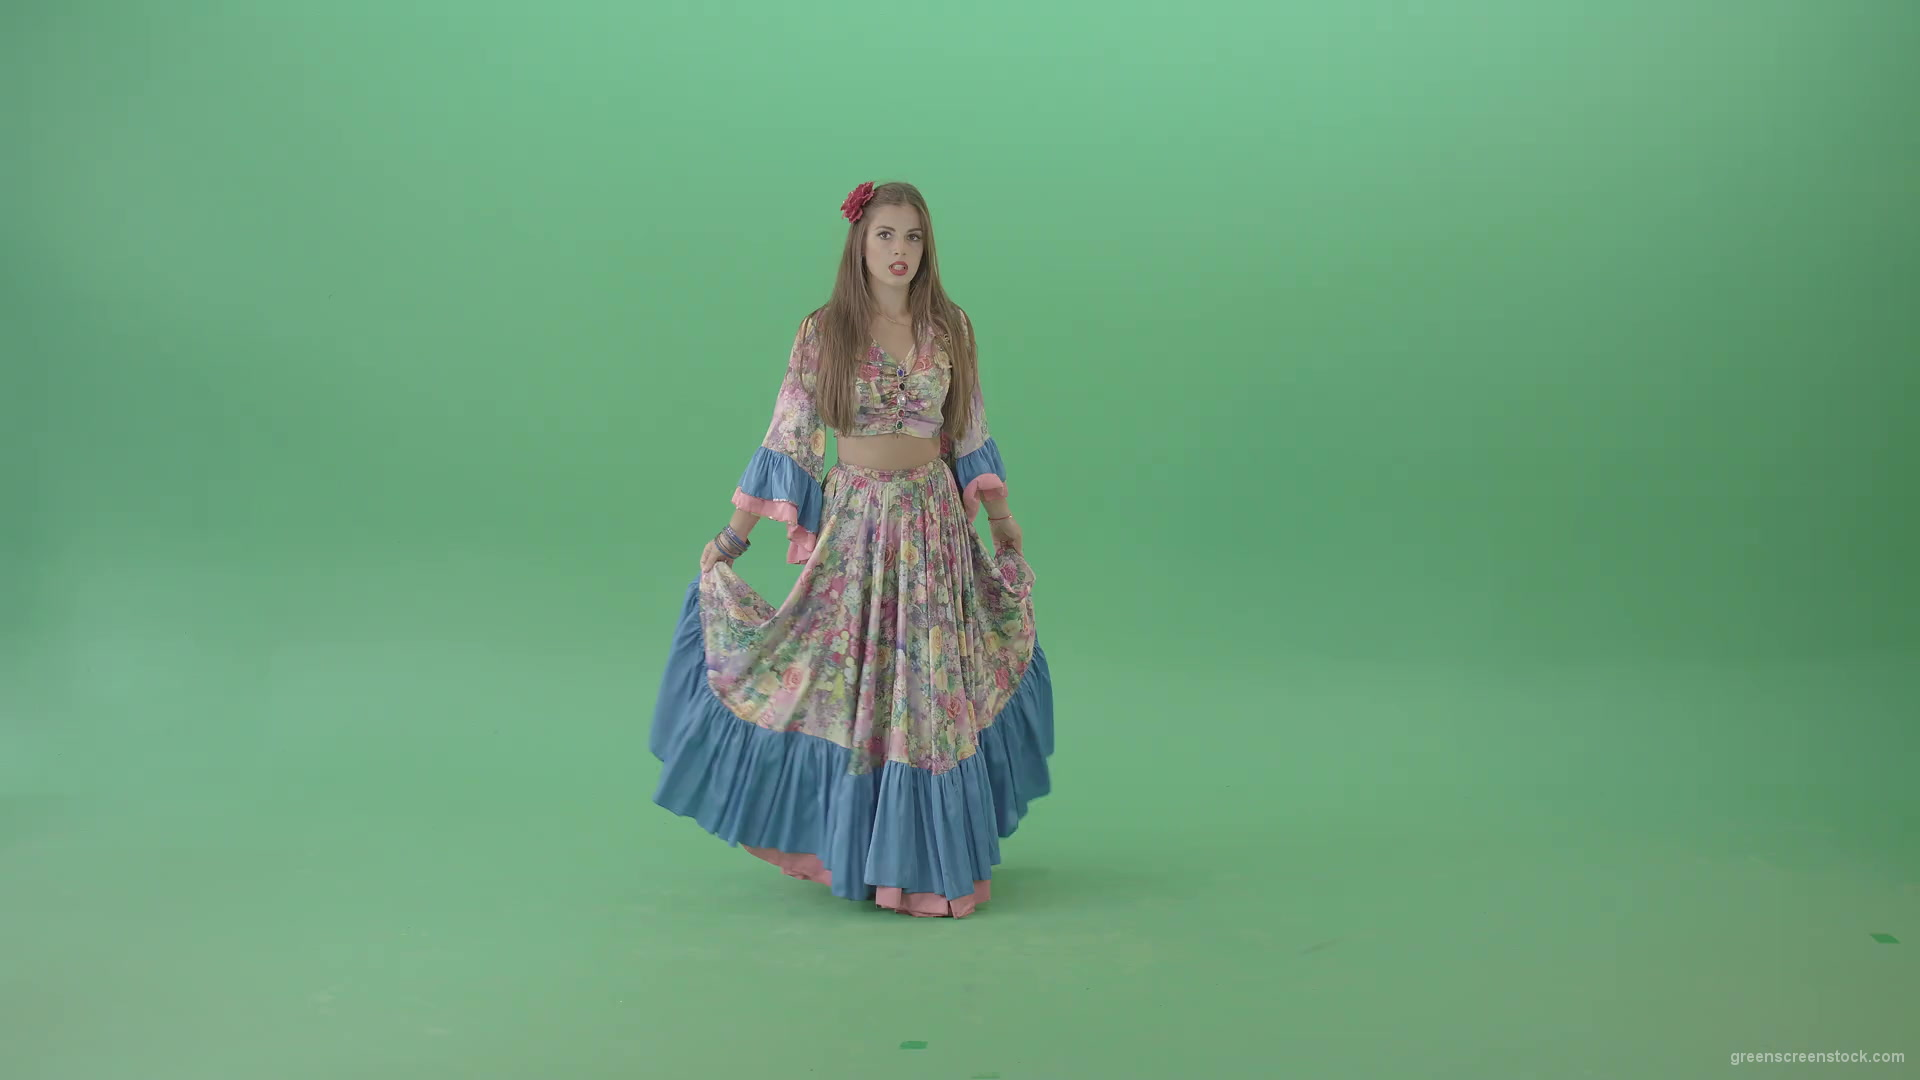 Balkan-roma-girl-waving-gypsy-dress-and-dancing-isolated-on-green-screen-4K-Video-Footage-1-1920_001 Green Screen Stock